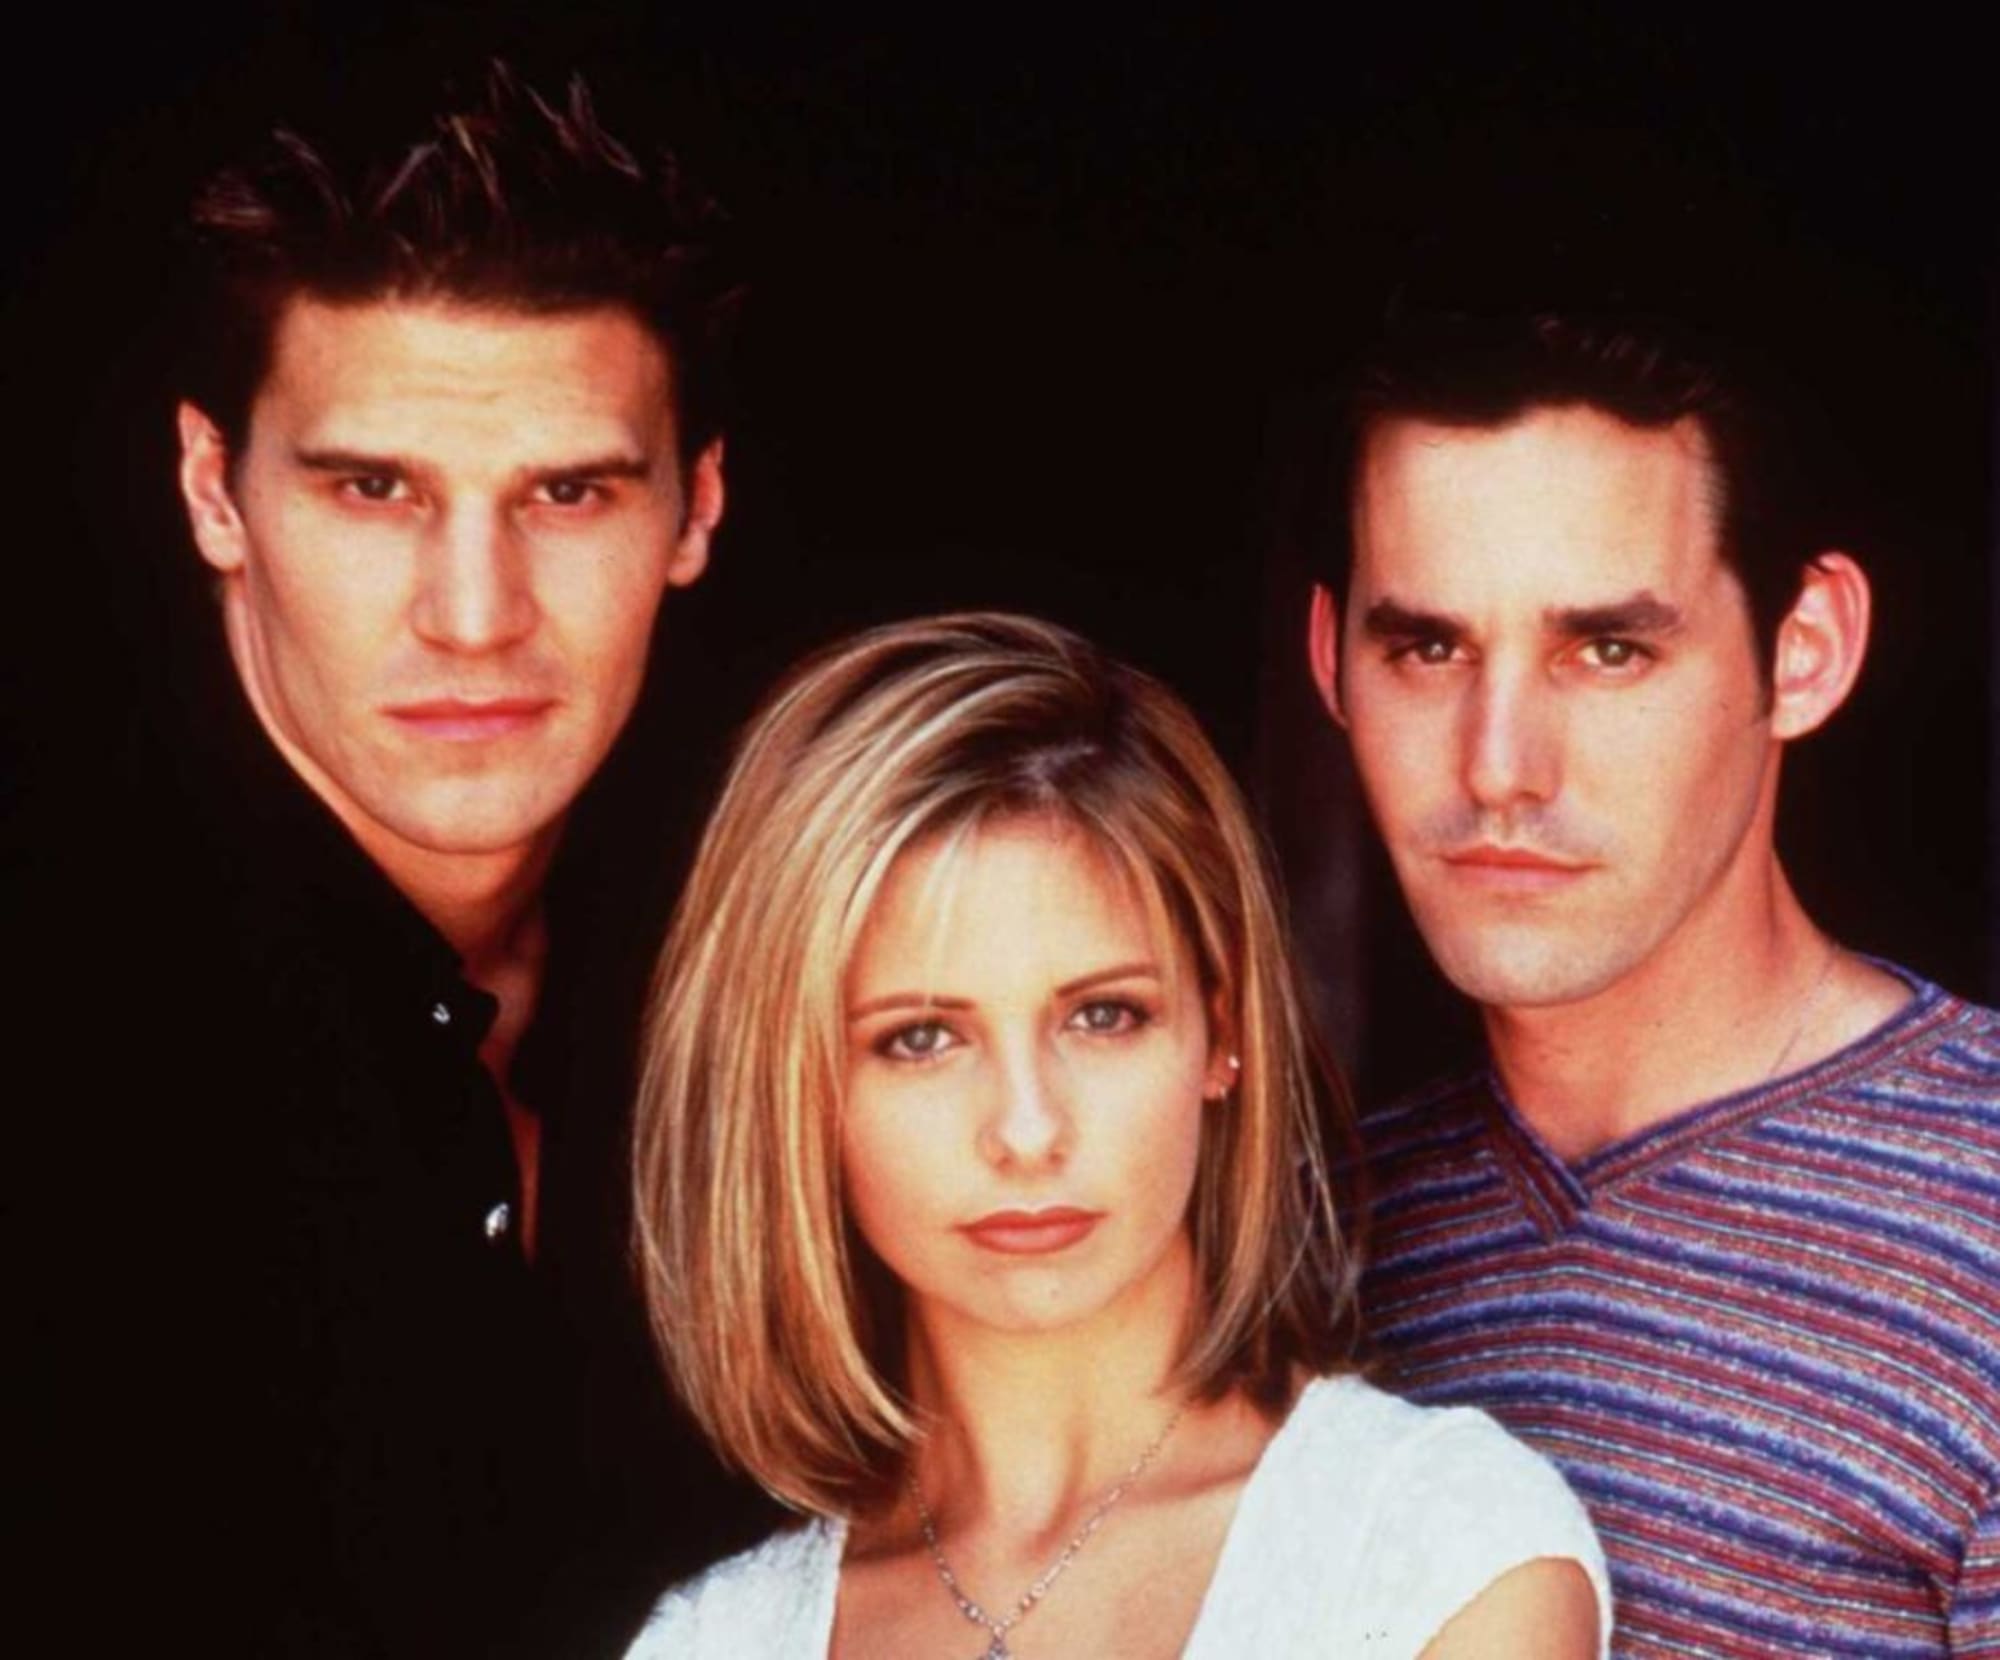 Buffy the Vampire Slayer calendar accidentally has Doctor Who characters